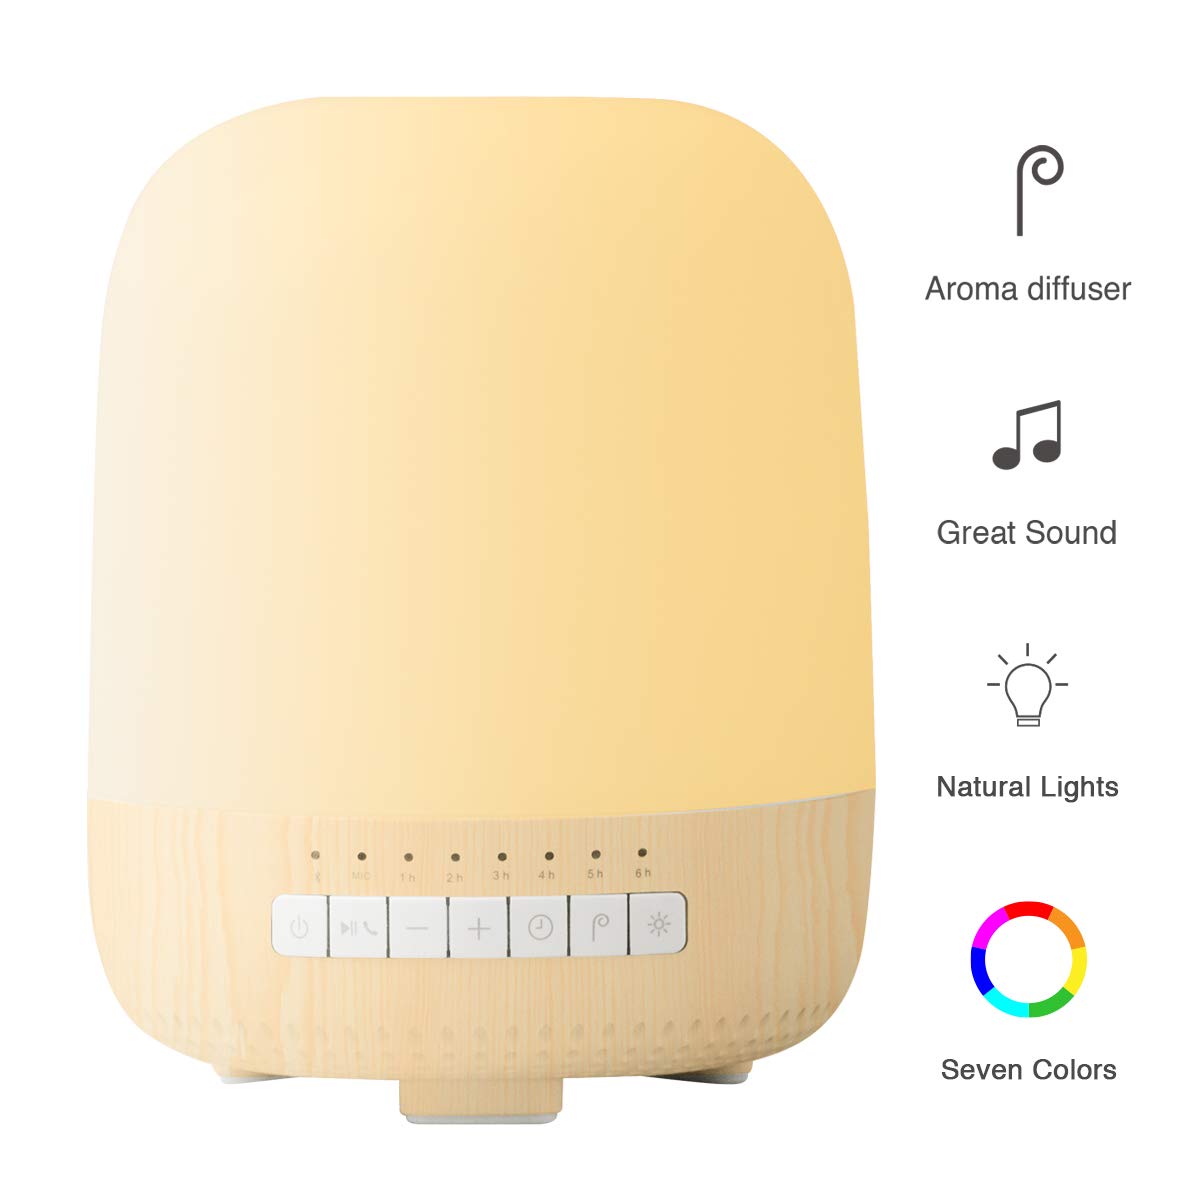 Aromatherapy Diffuser Bluetooth Speaker With LED Color Changing